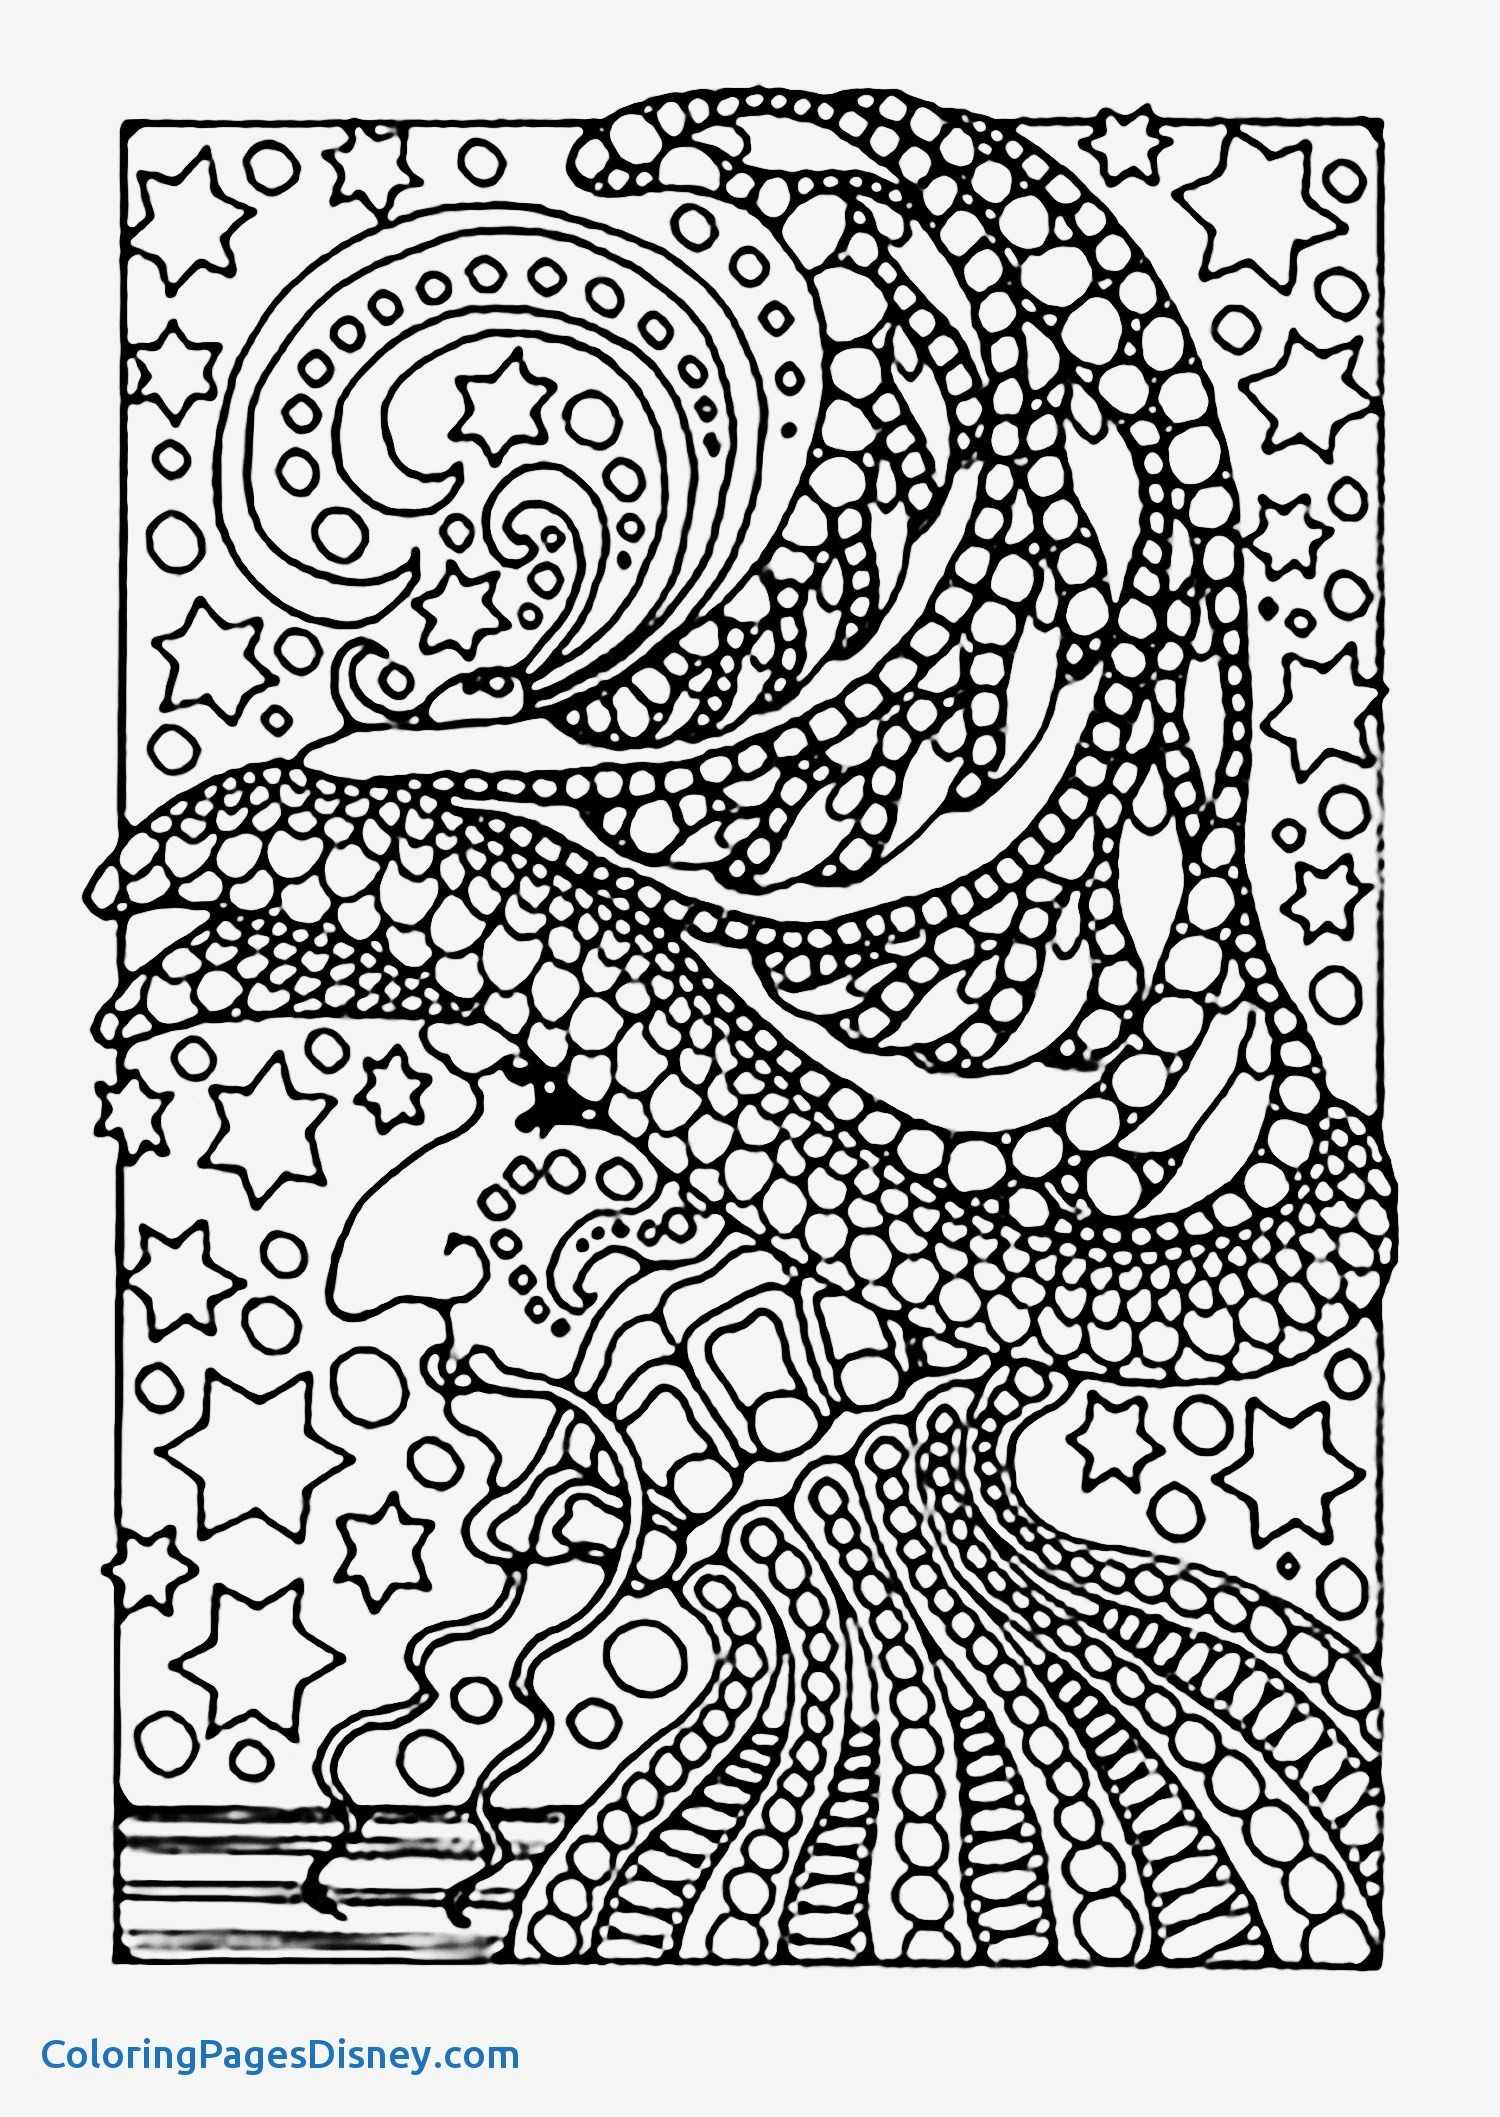 Parts Of A Flower Worksheet together with 35 Luxury Flower Coloring Books Collection